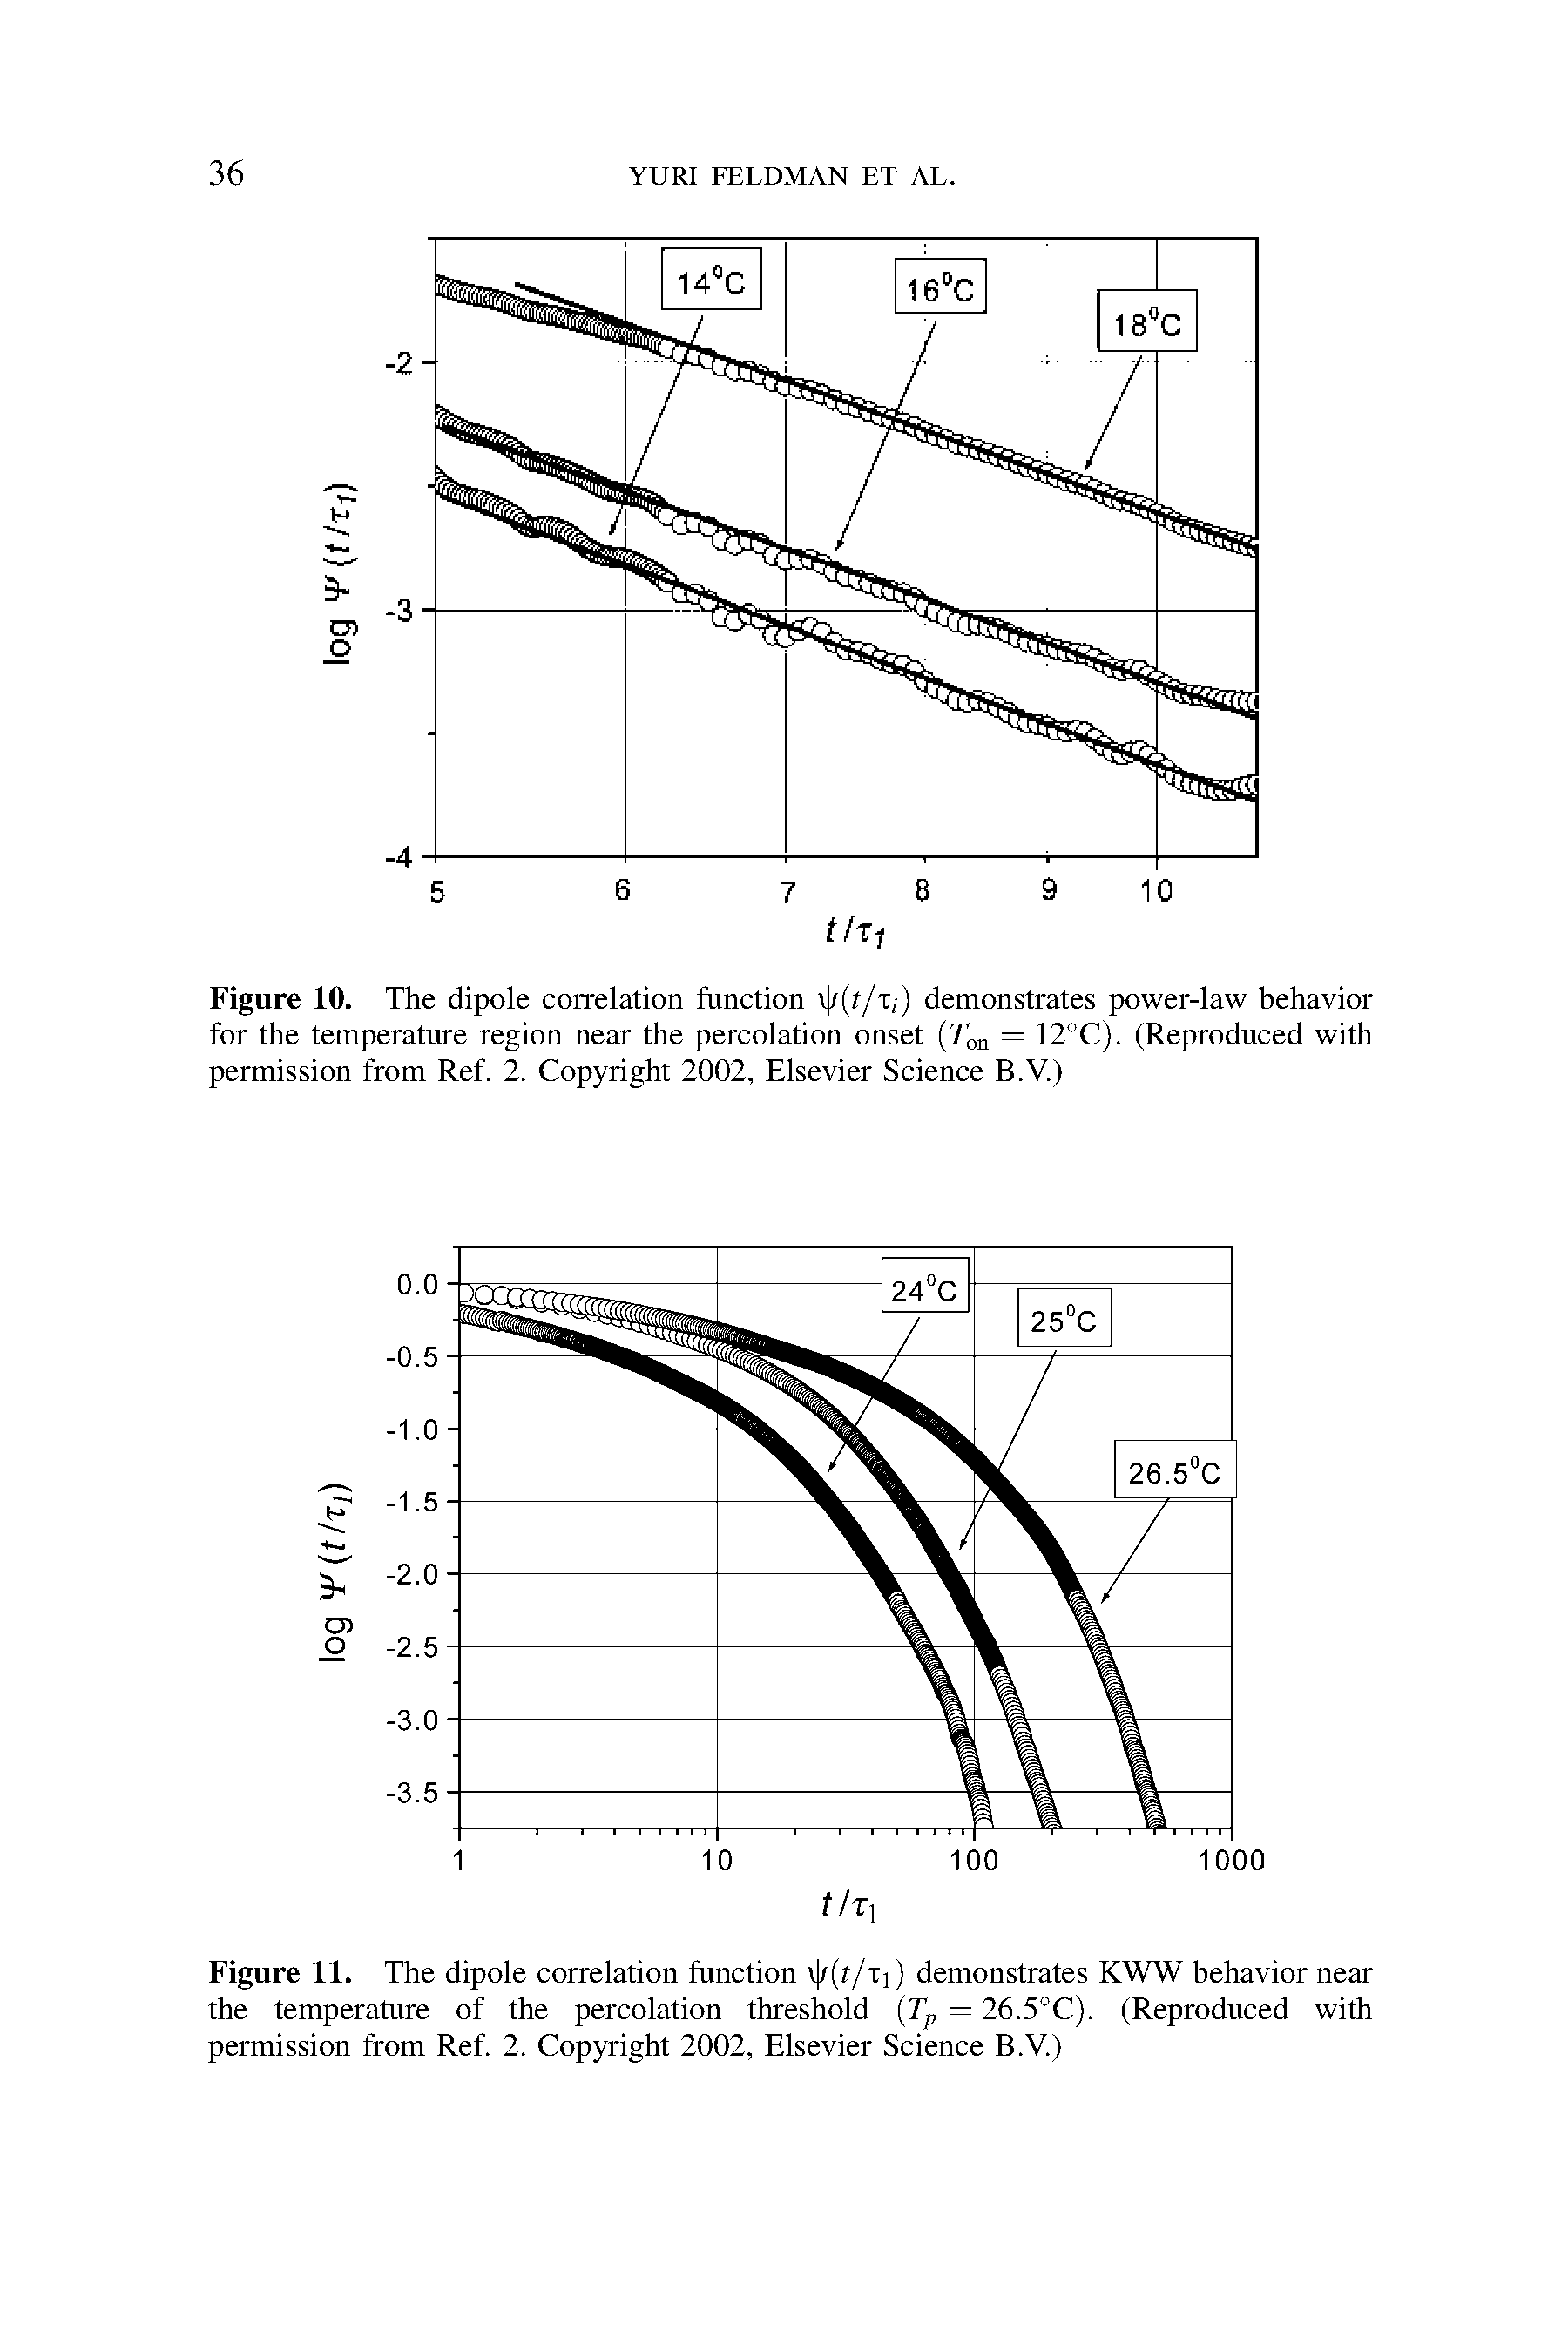 Figure 10. The dipole correlation function v /(f/T,-) demonstrates power-law behavior for the temperature region near the percolation onset (Ton — 12°C). (Reproduced with permission from Ref. 2. Copyright 2002, Elsevier Science B.V.)...